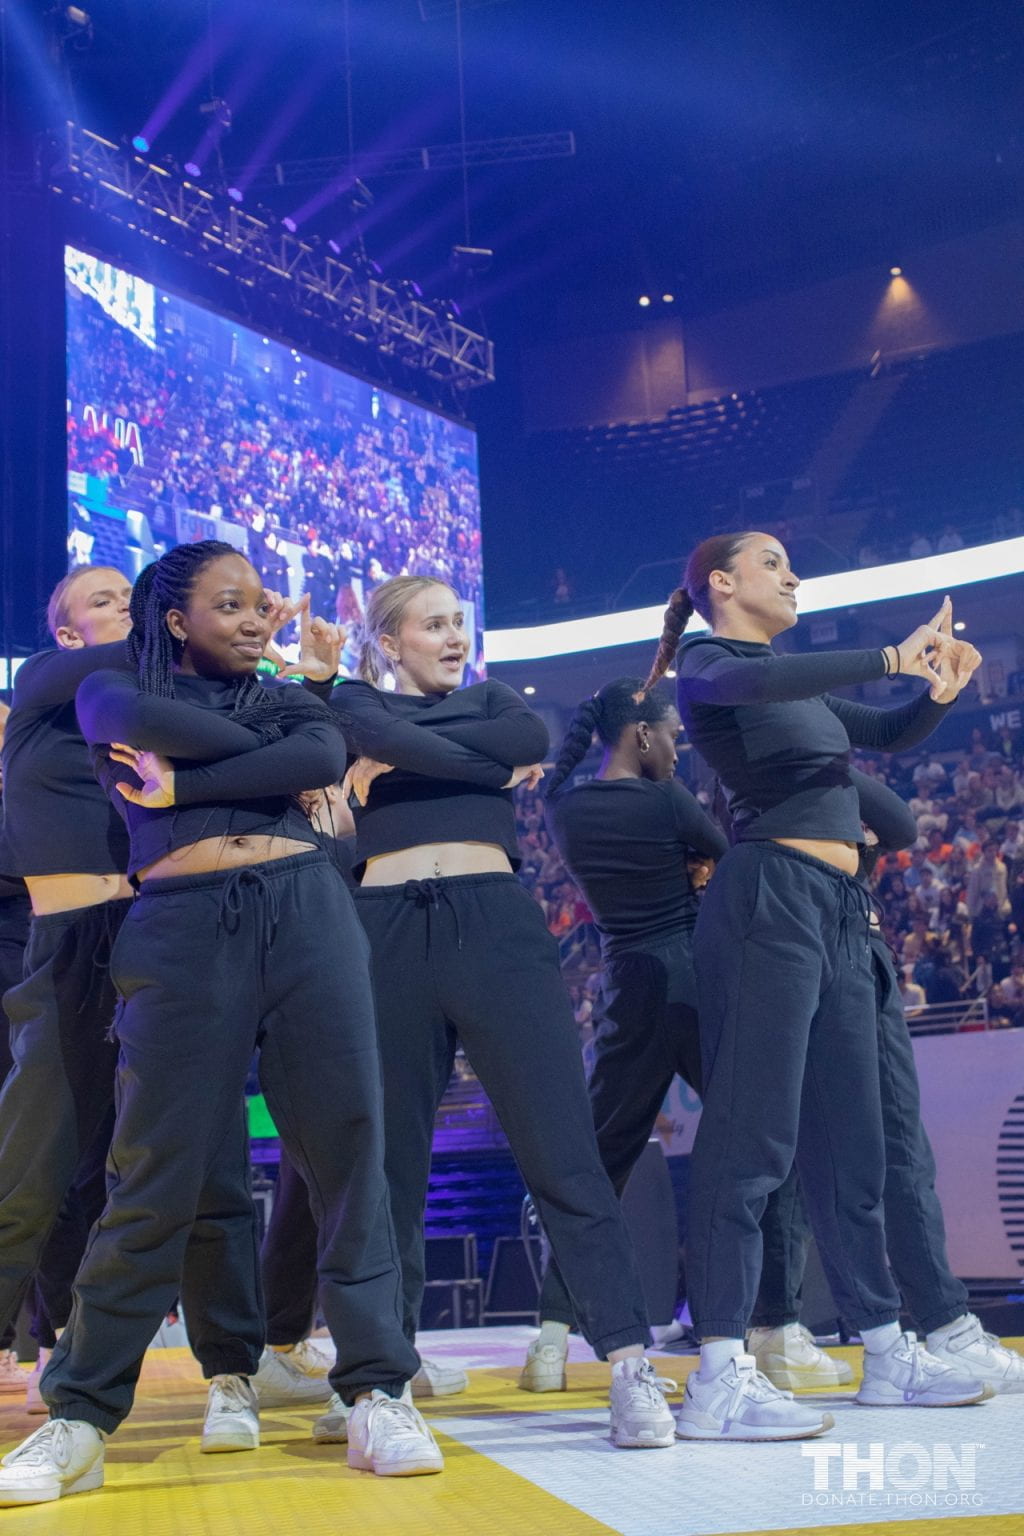 a group of diverse young women stand posing in a stage dressed in black